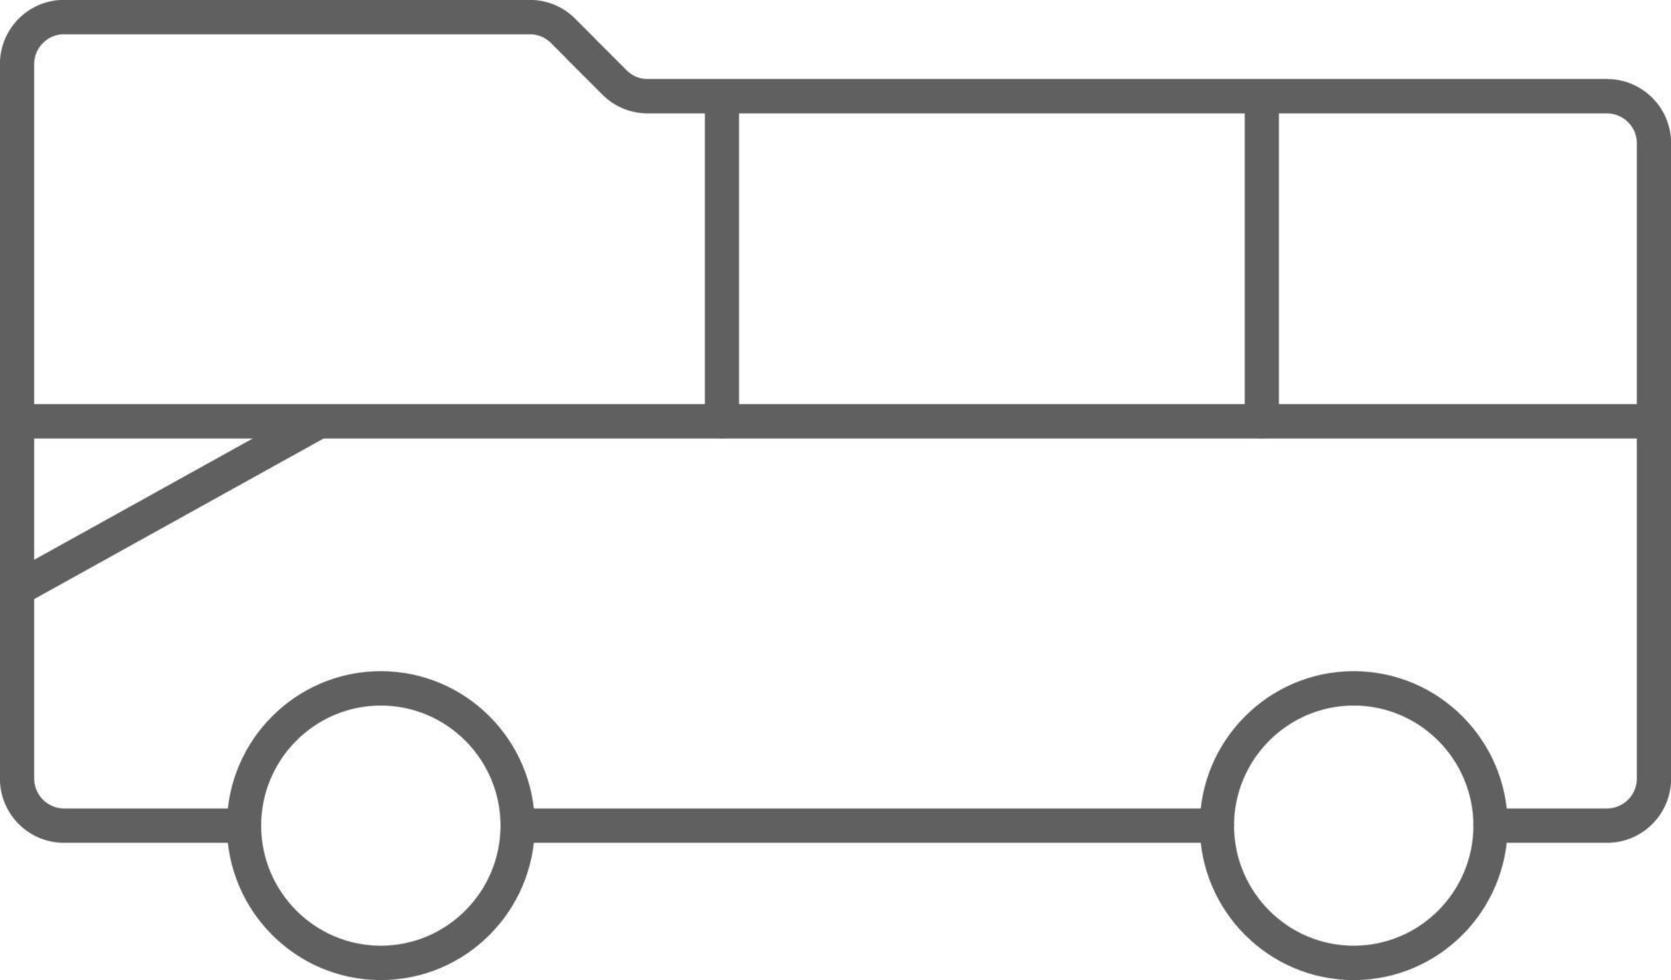 BUS Transportation icon people icons with black outline style. Vehicle, symbol, business, transport, line, outline, travel, automobile, editable, pictogram, isolated, flat. Vector illustration